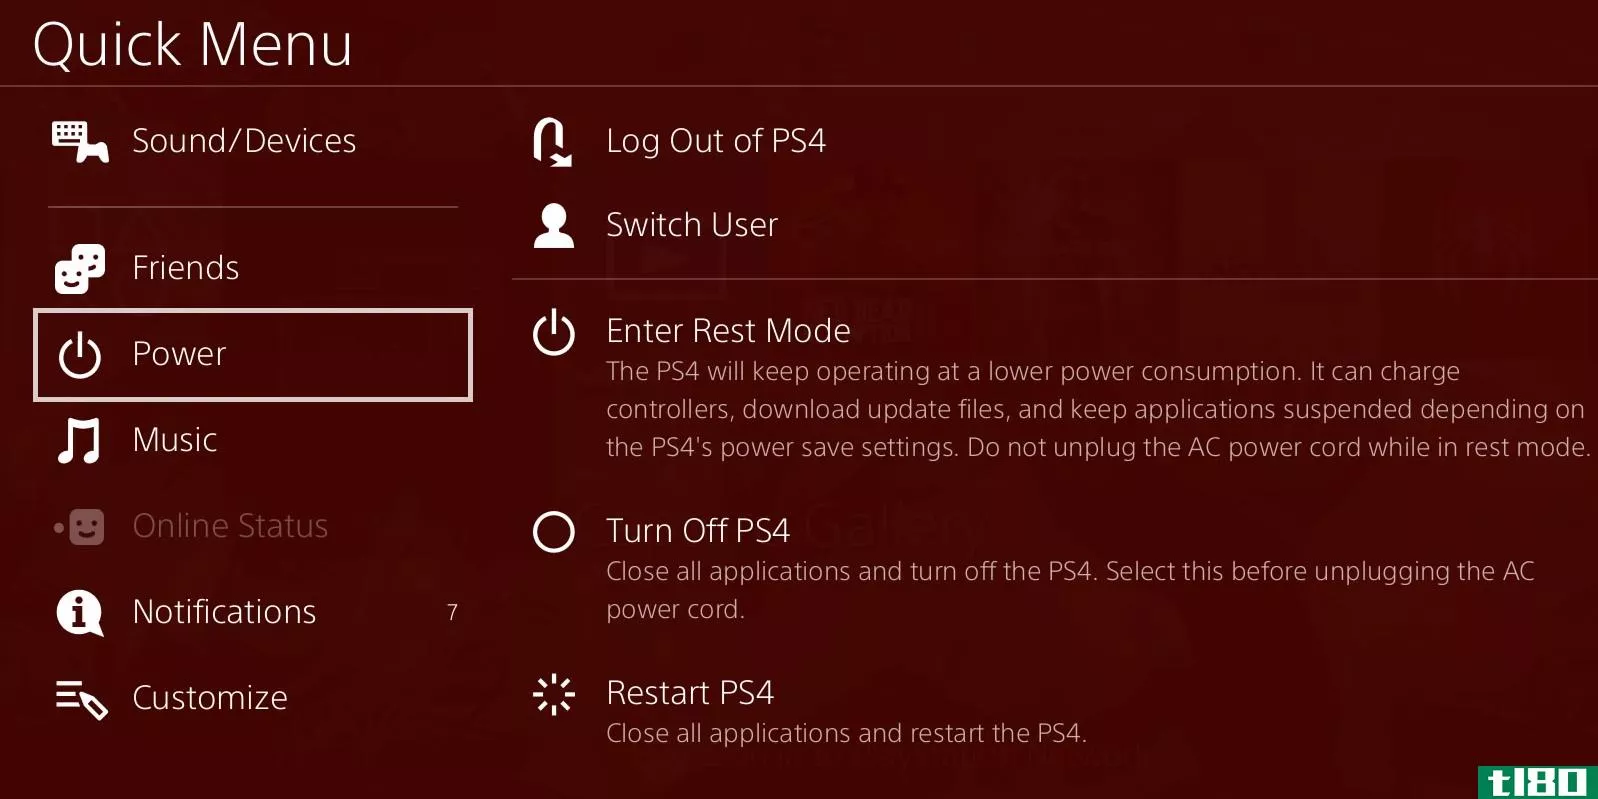 Turn a PS4 off using the Quick menu